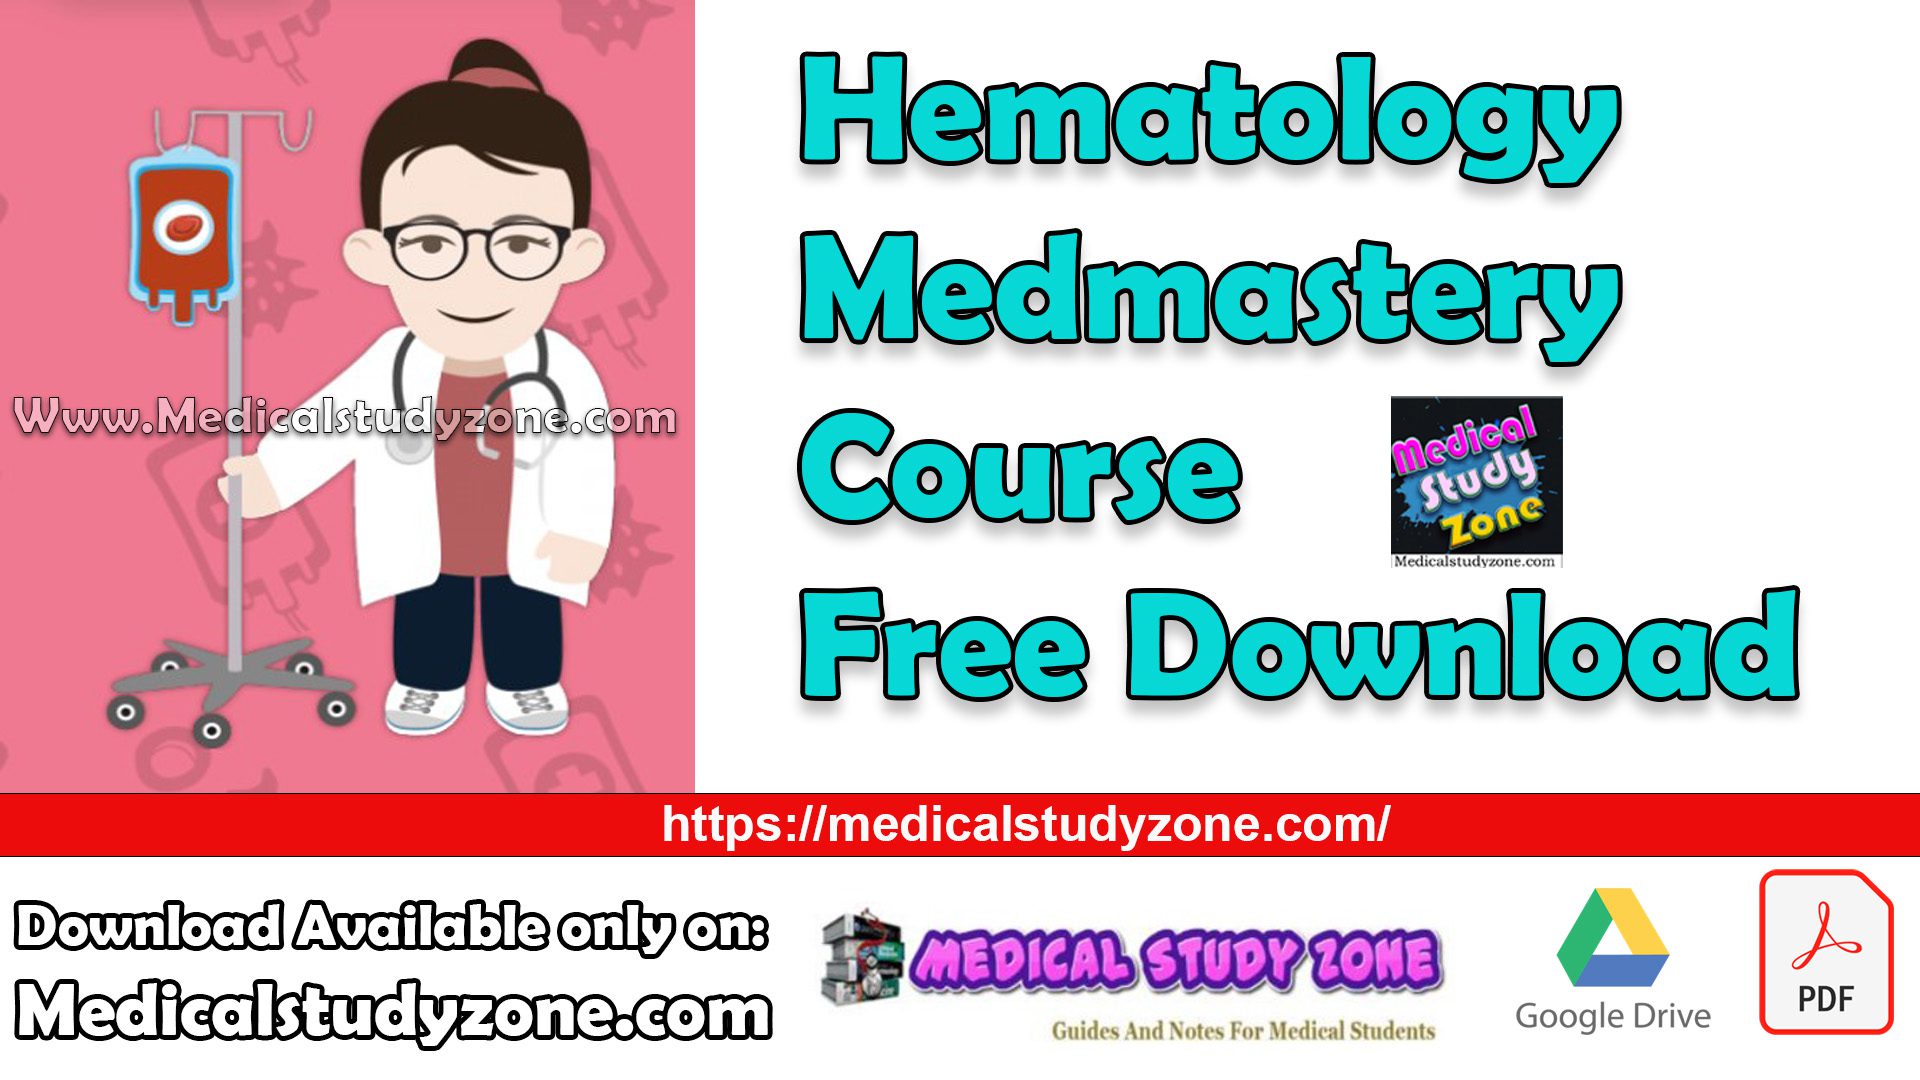 Hematology Medmastery Course Free Download